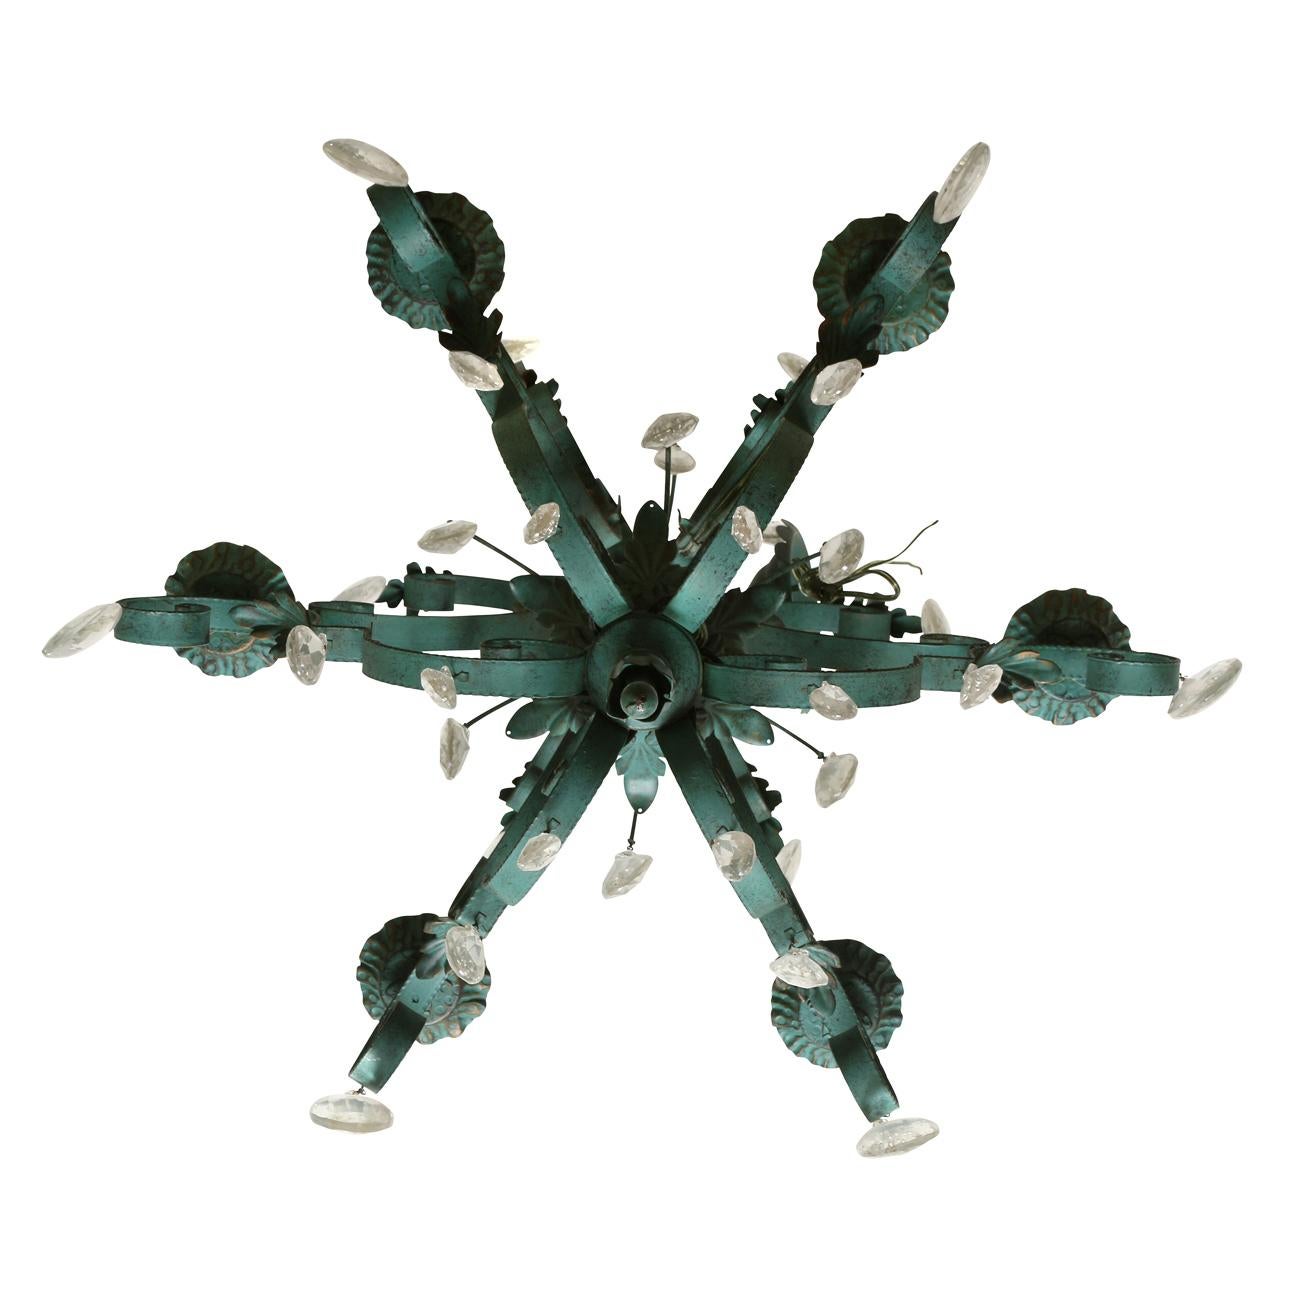 A green painted metal and tole six arm chandelier with scroll arms, acanthus leaf detail and hanging crystals from multiple tiers.